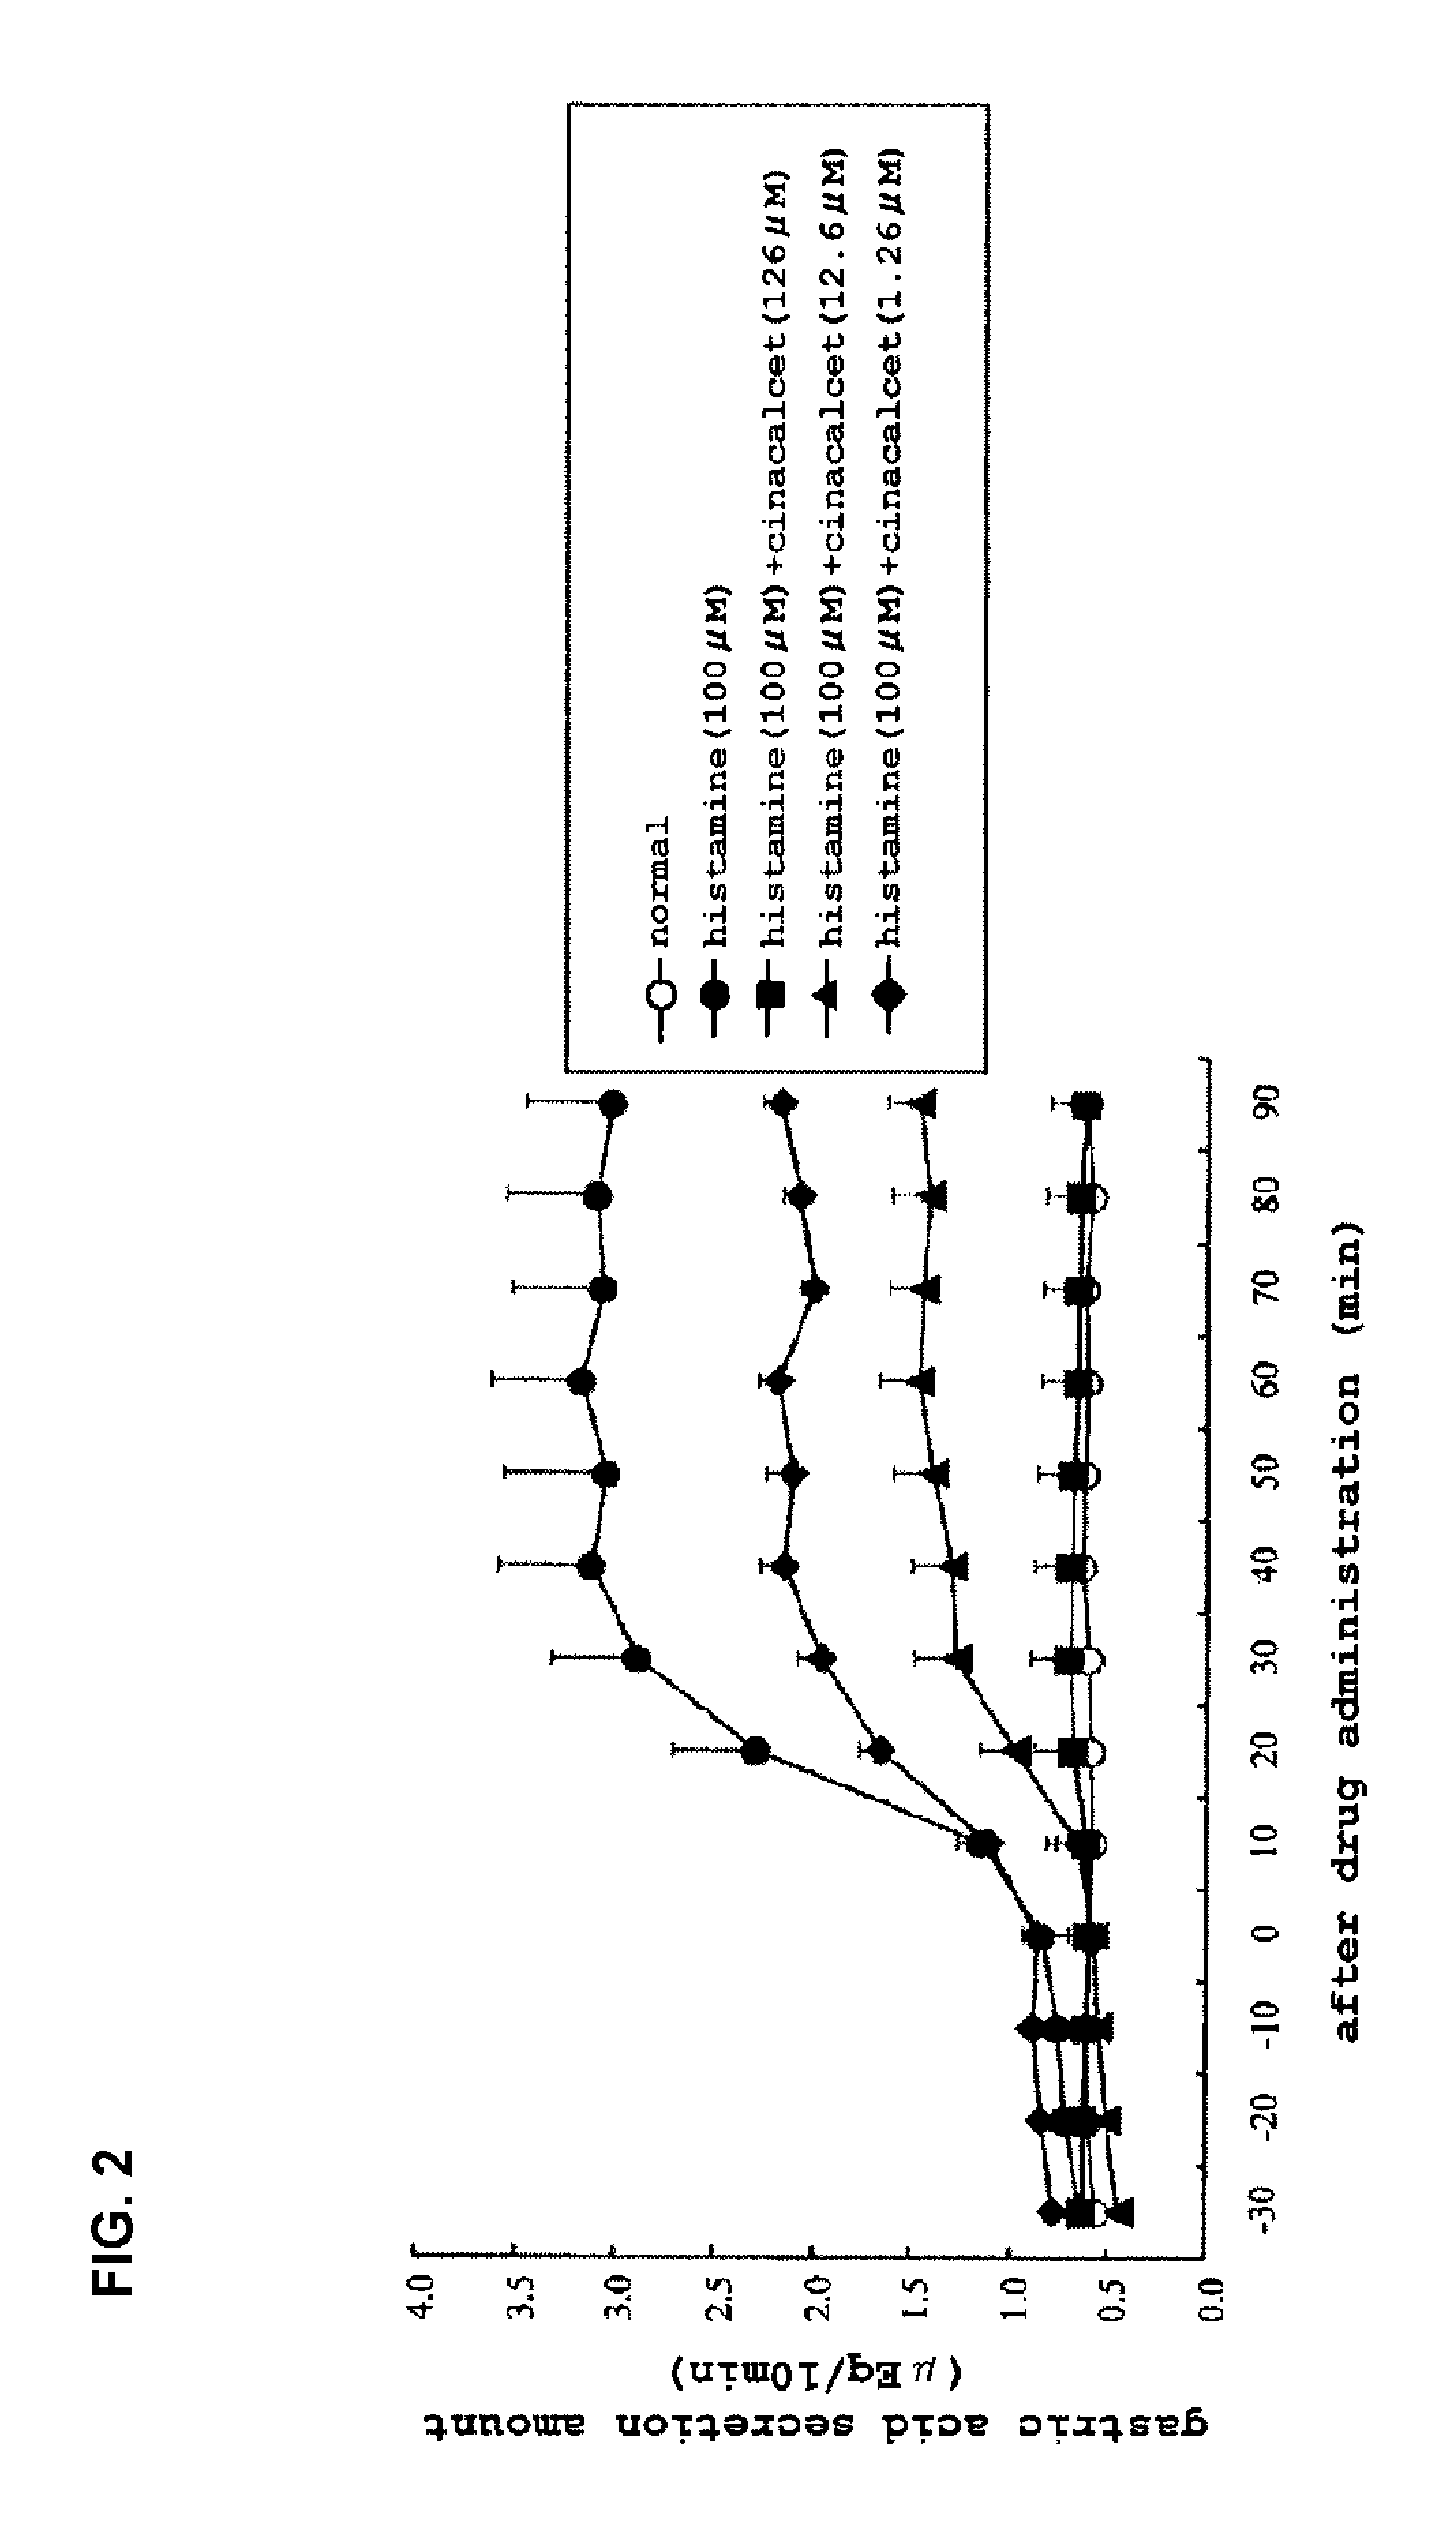 Promoter for bicarbonate secretion in gastrointestinal tract